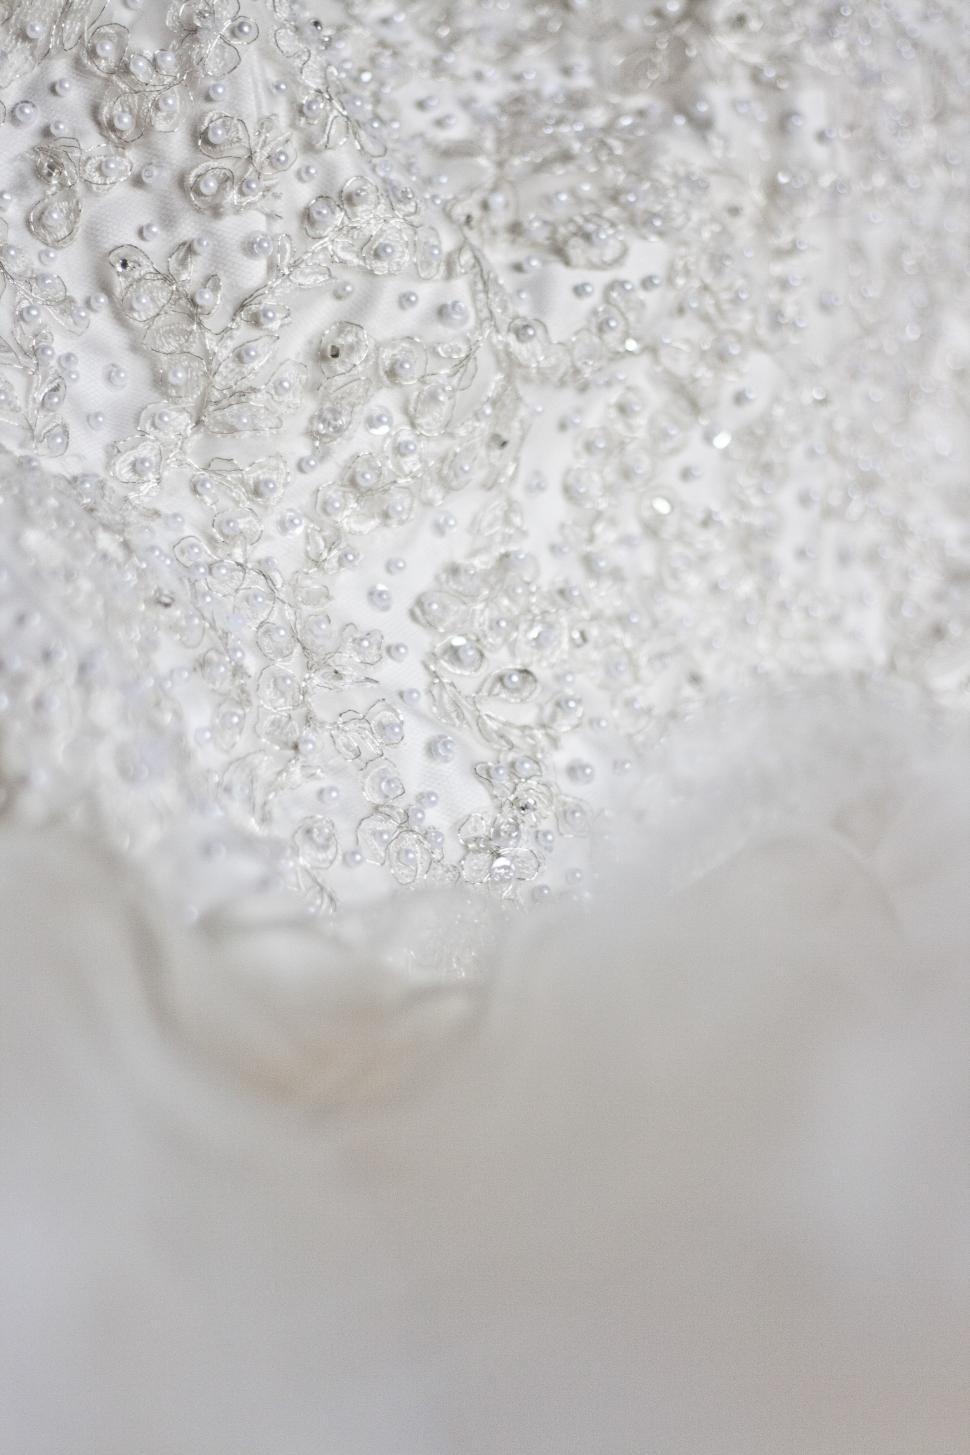 Free Image of Close Up View of Water and Bubbles 